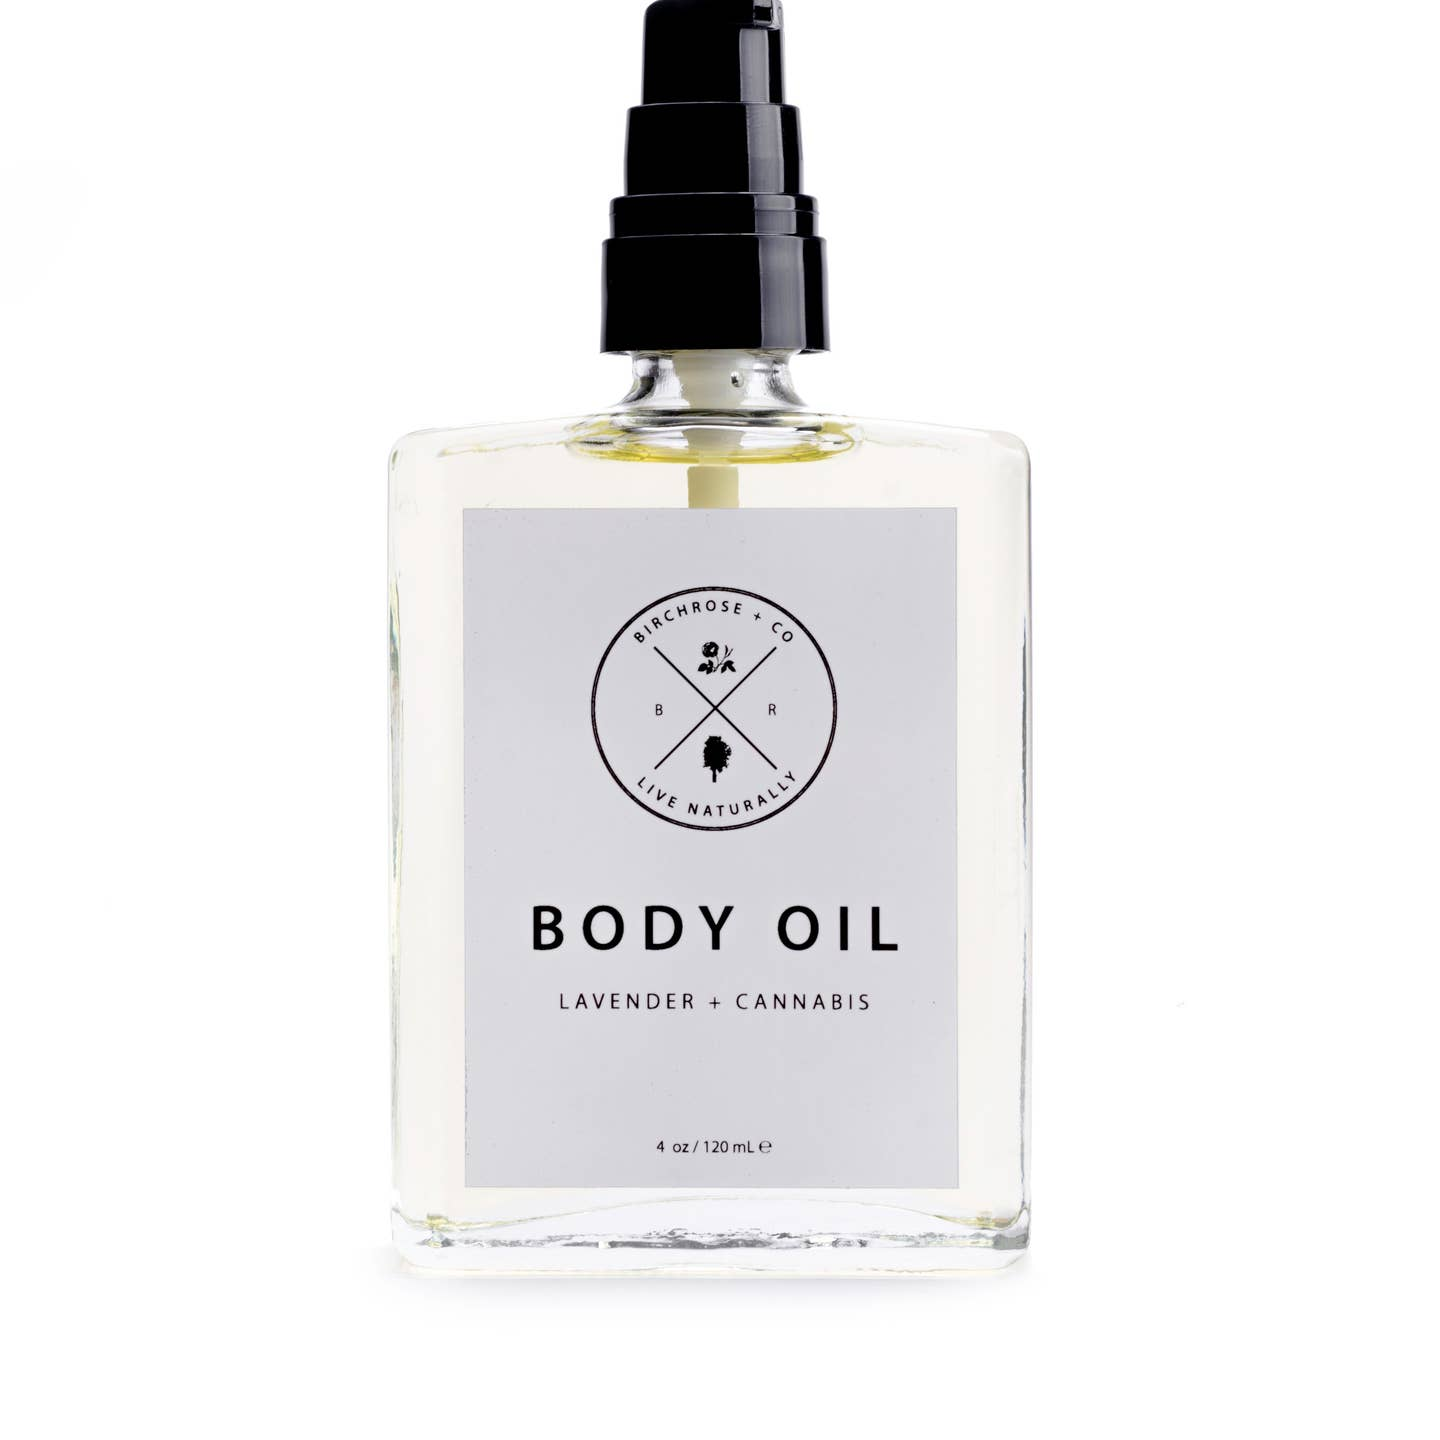 Lavender and Cannabis Body Oil